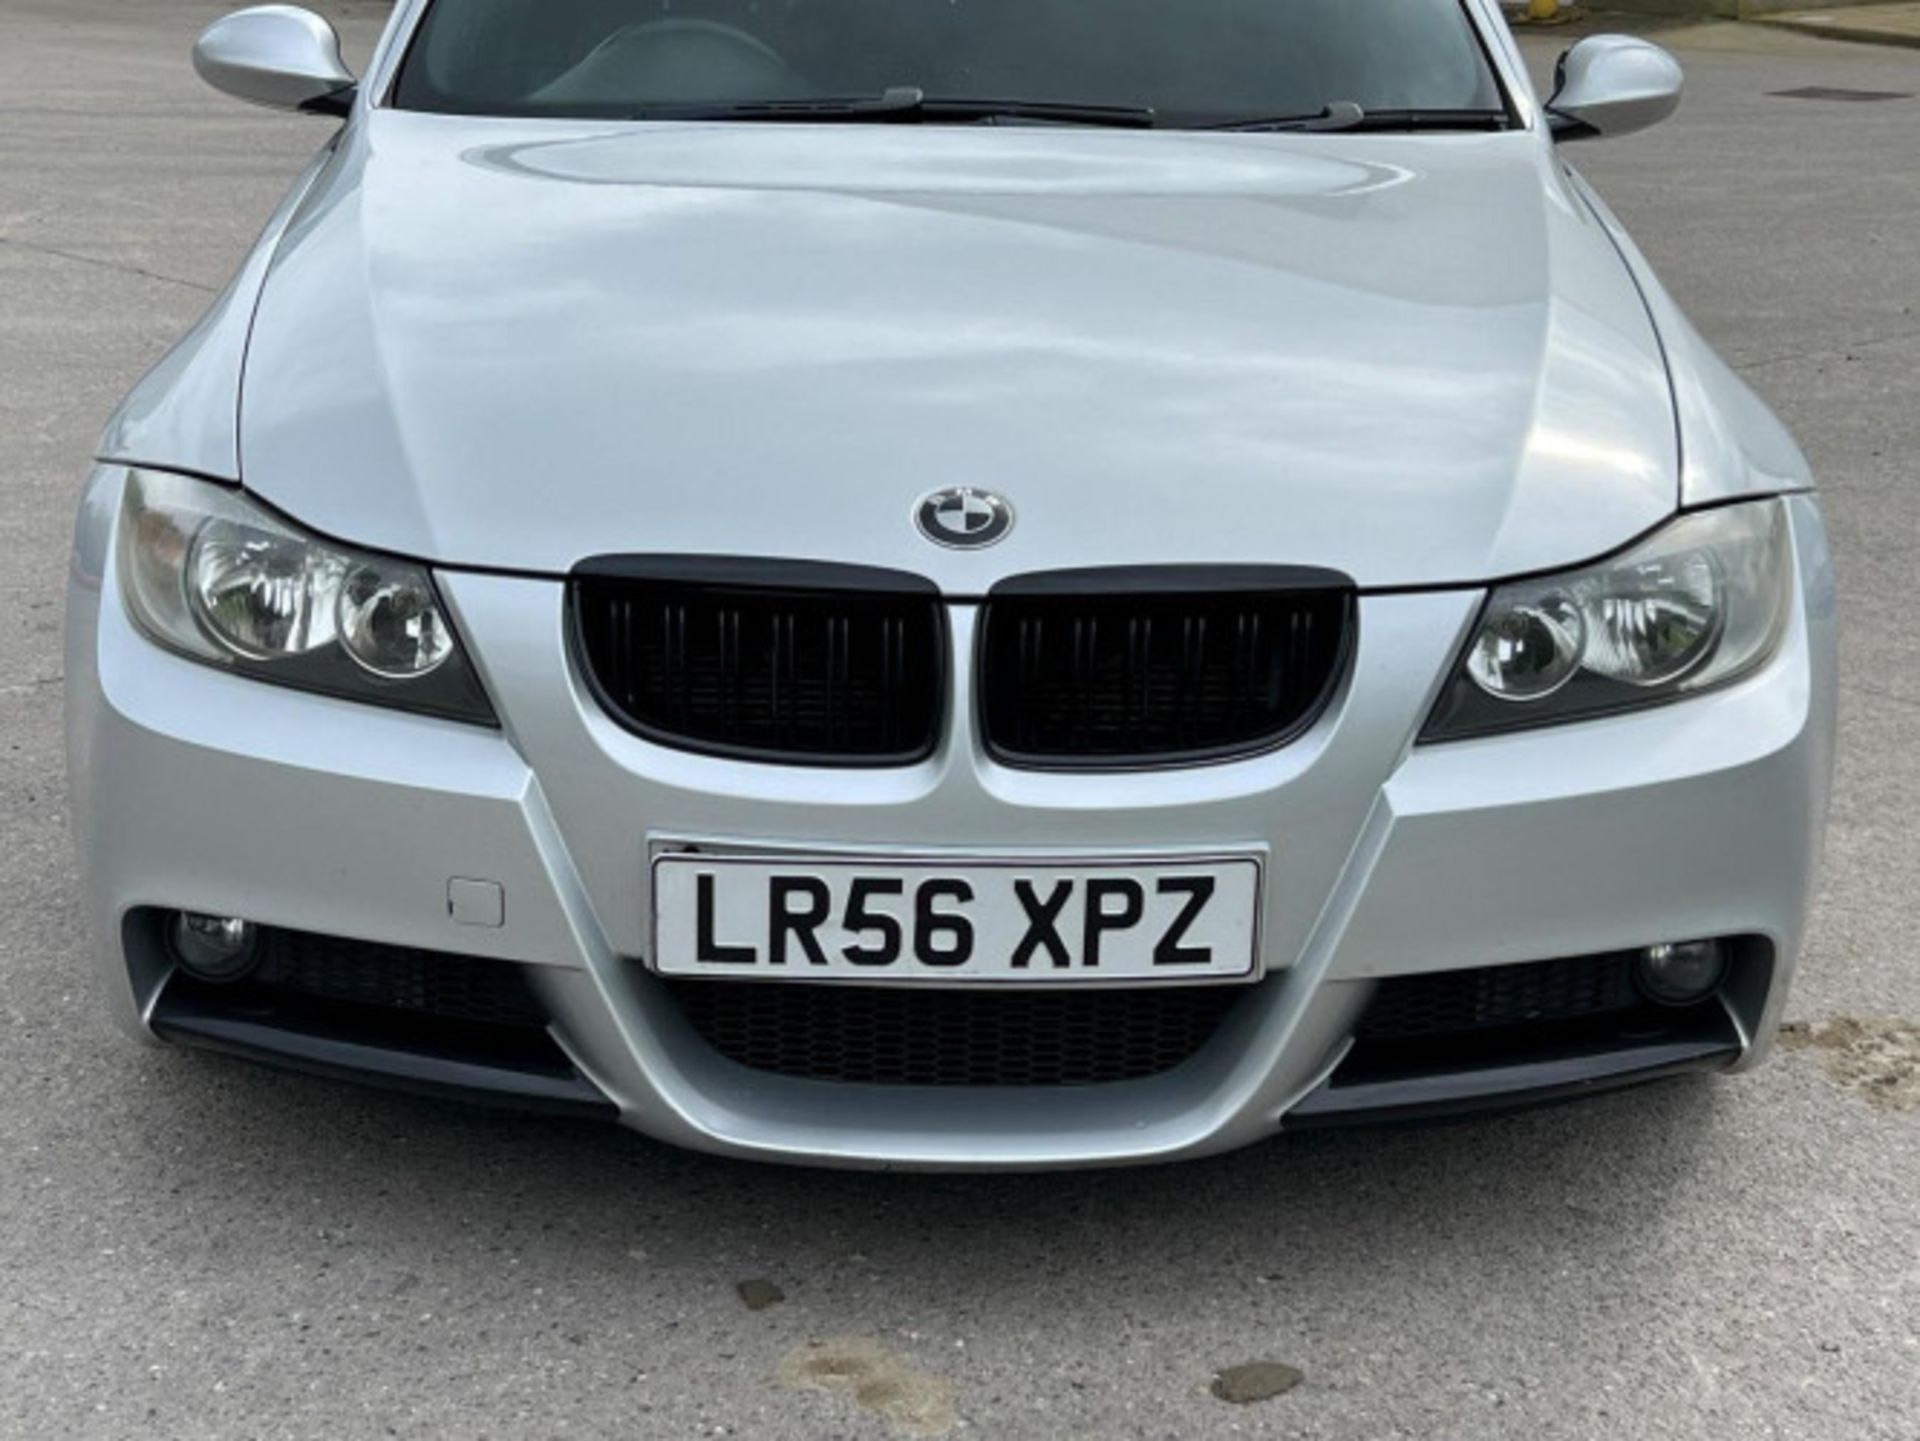 LUXURIOUS PERFORMANCE: 2006 BMW 3 SERIES 2.0 320D M SPORT AUTOMATIC >>--NO VAT ON HAMMER--<< - Image 41 of 98